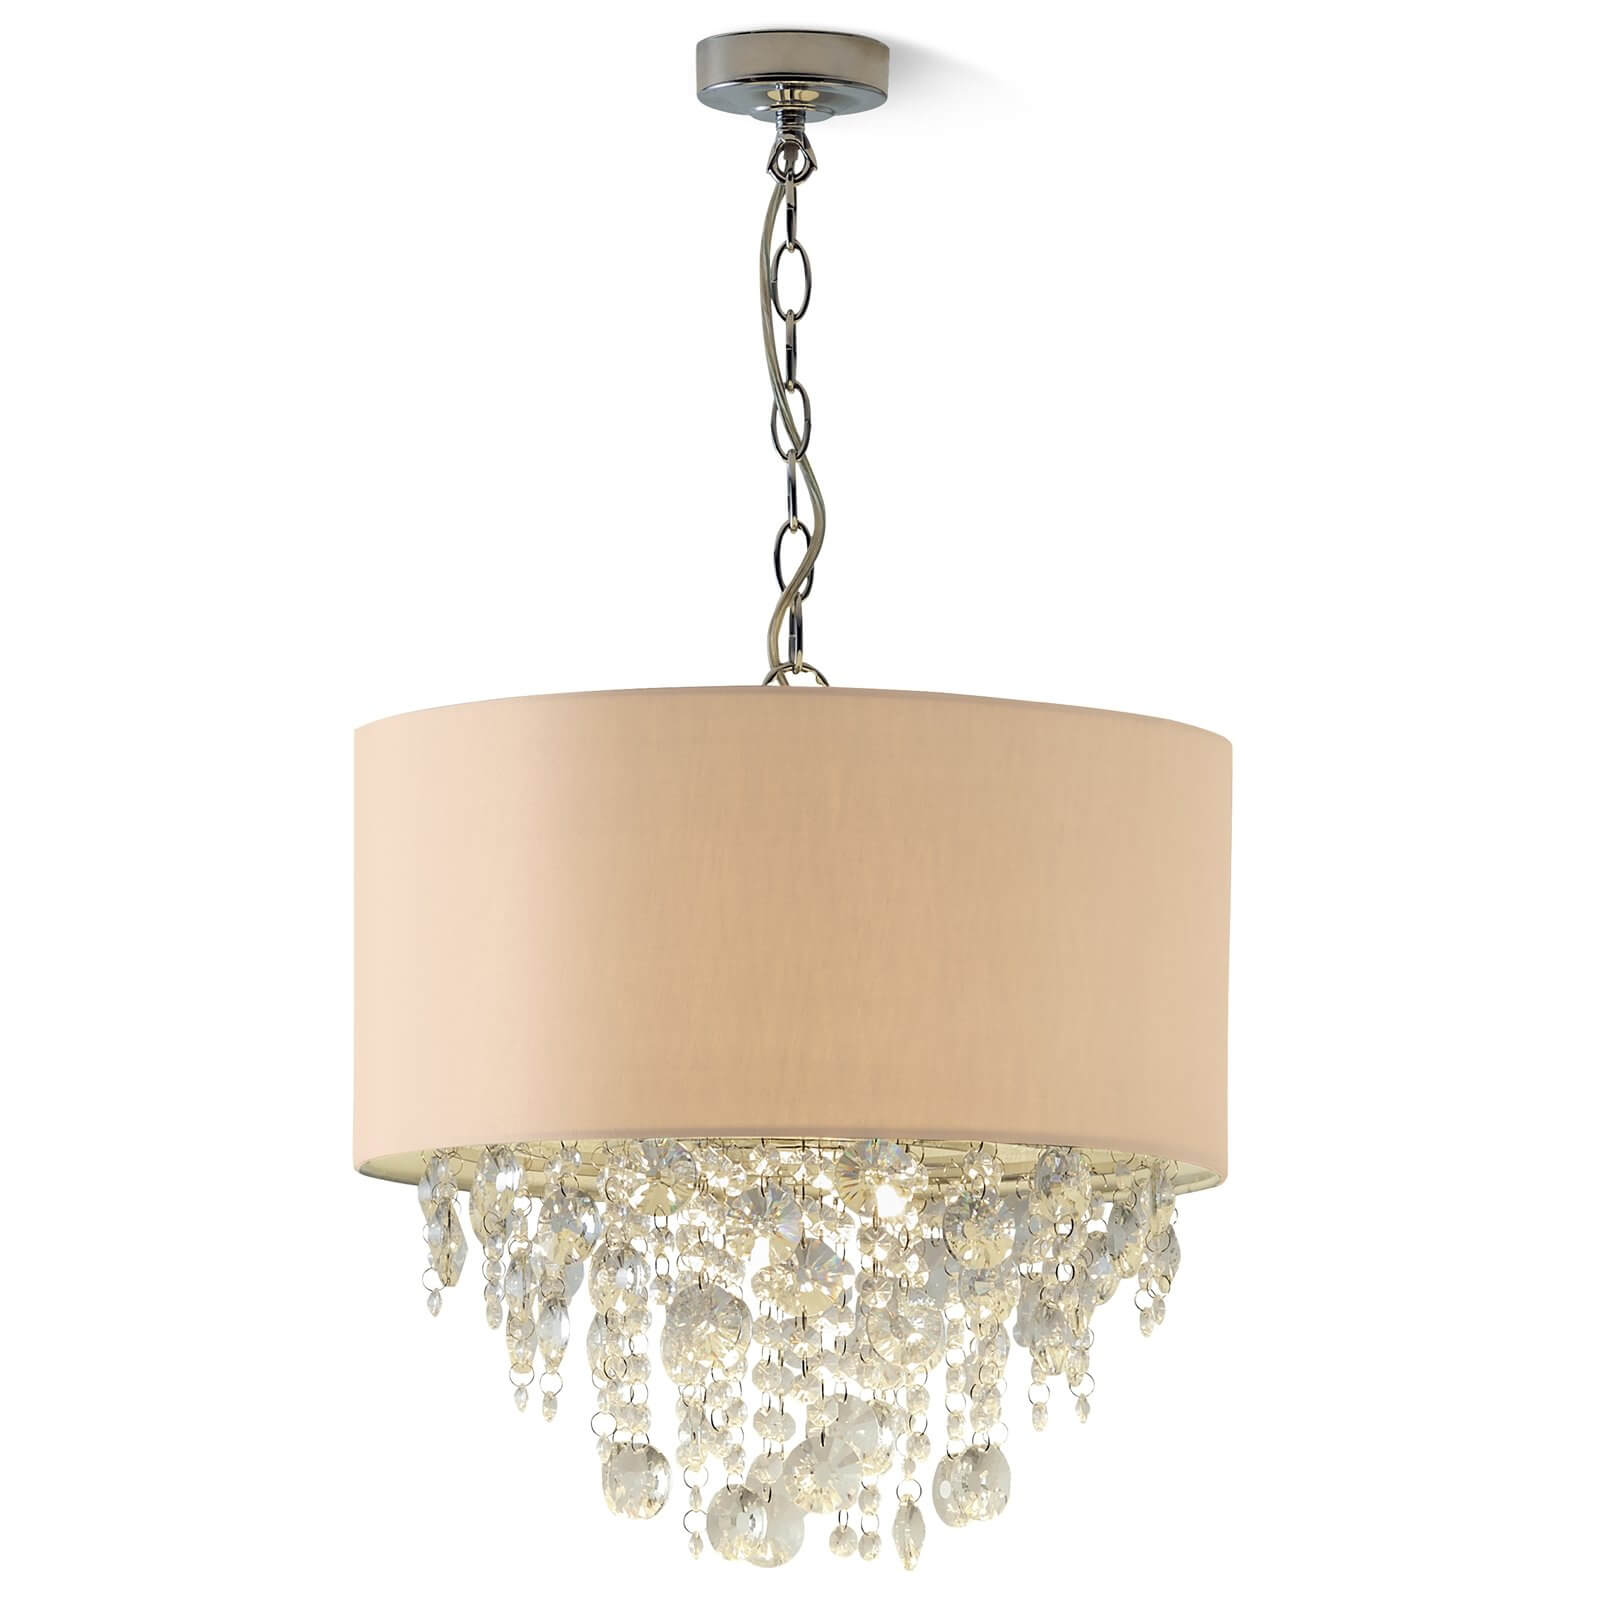 Wedmore Ceiling Light Shade with Crystal Droplets - Cream